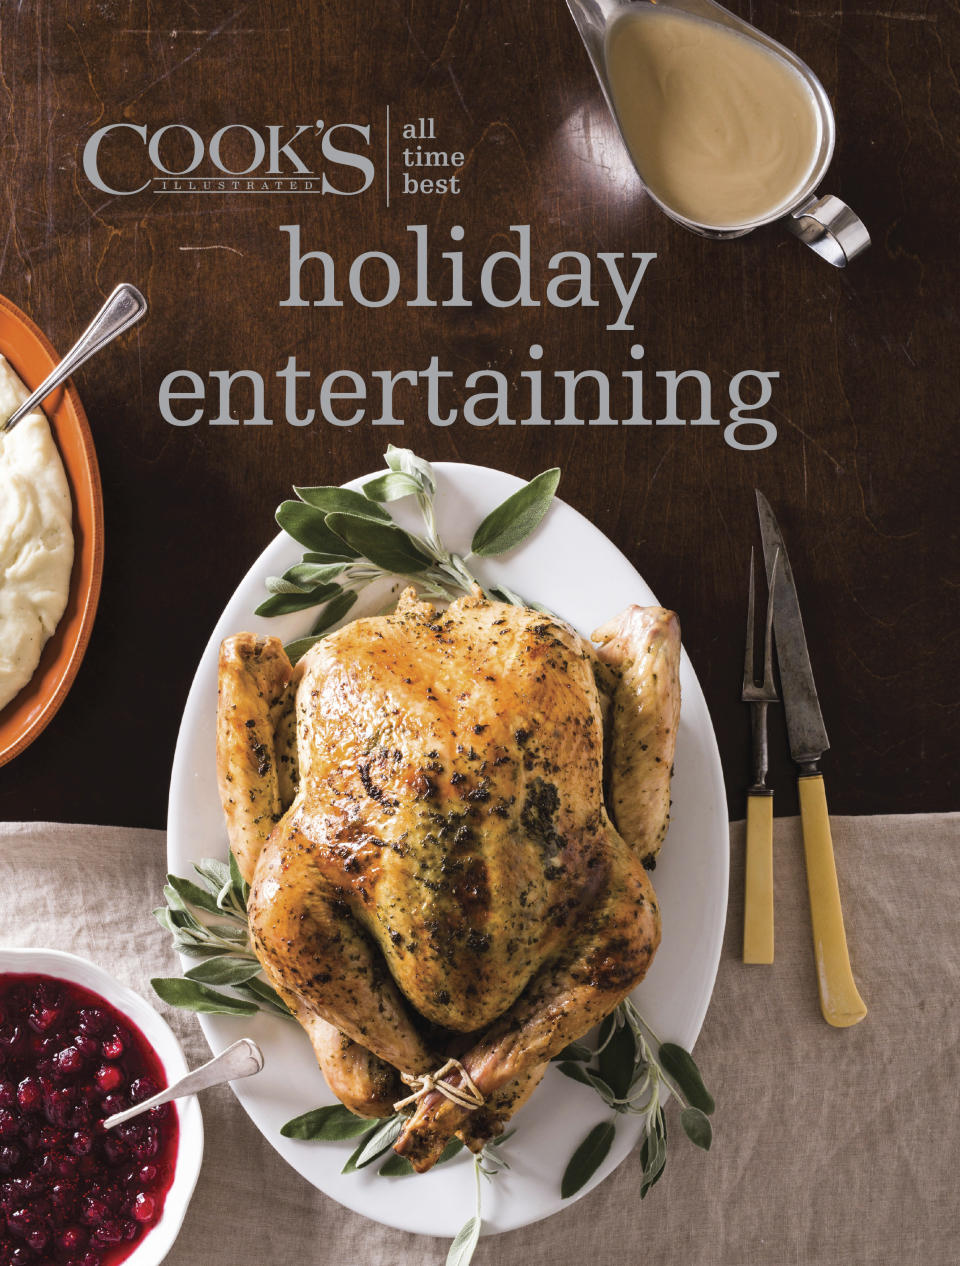 This image provided by America's Test Kitchen in September 2018 shows the cover for the cookbook “All-Time Best Holiday Entertaining.” It includes a recipe for a deep dish apple pie. (America's Test Kitchen via AP)